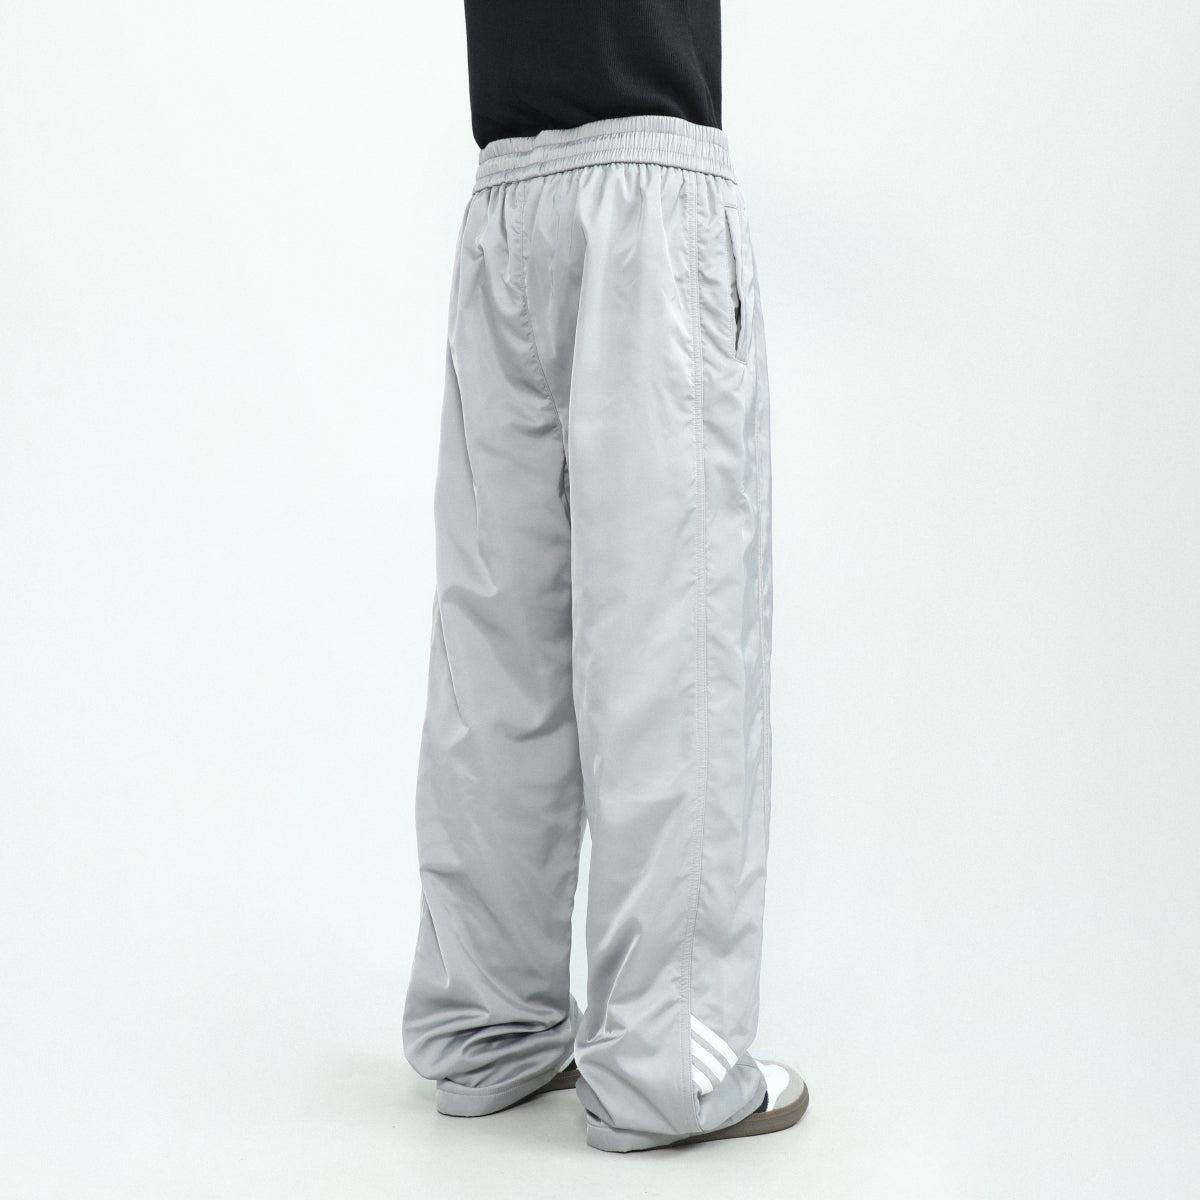 Striped Hem Track Pants Korean Street Fashion Pants By Mr Nearly Shop Online at OH Vault